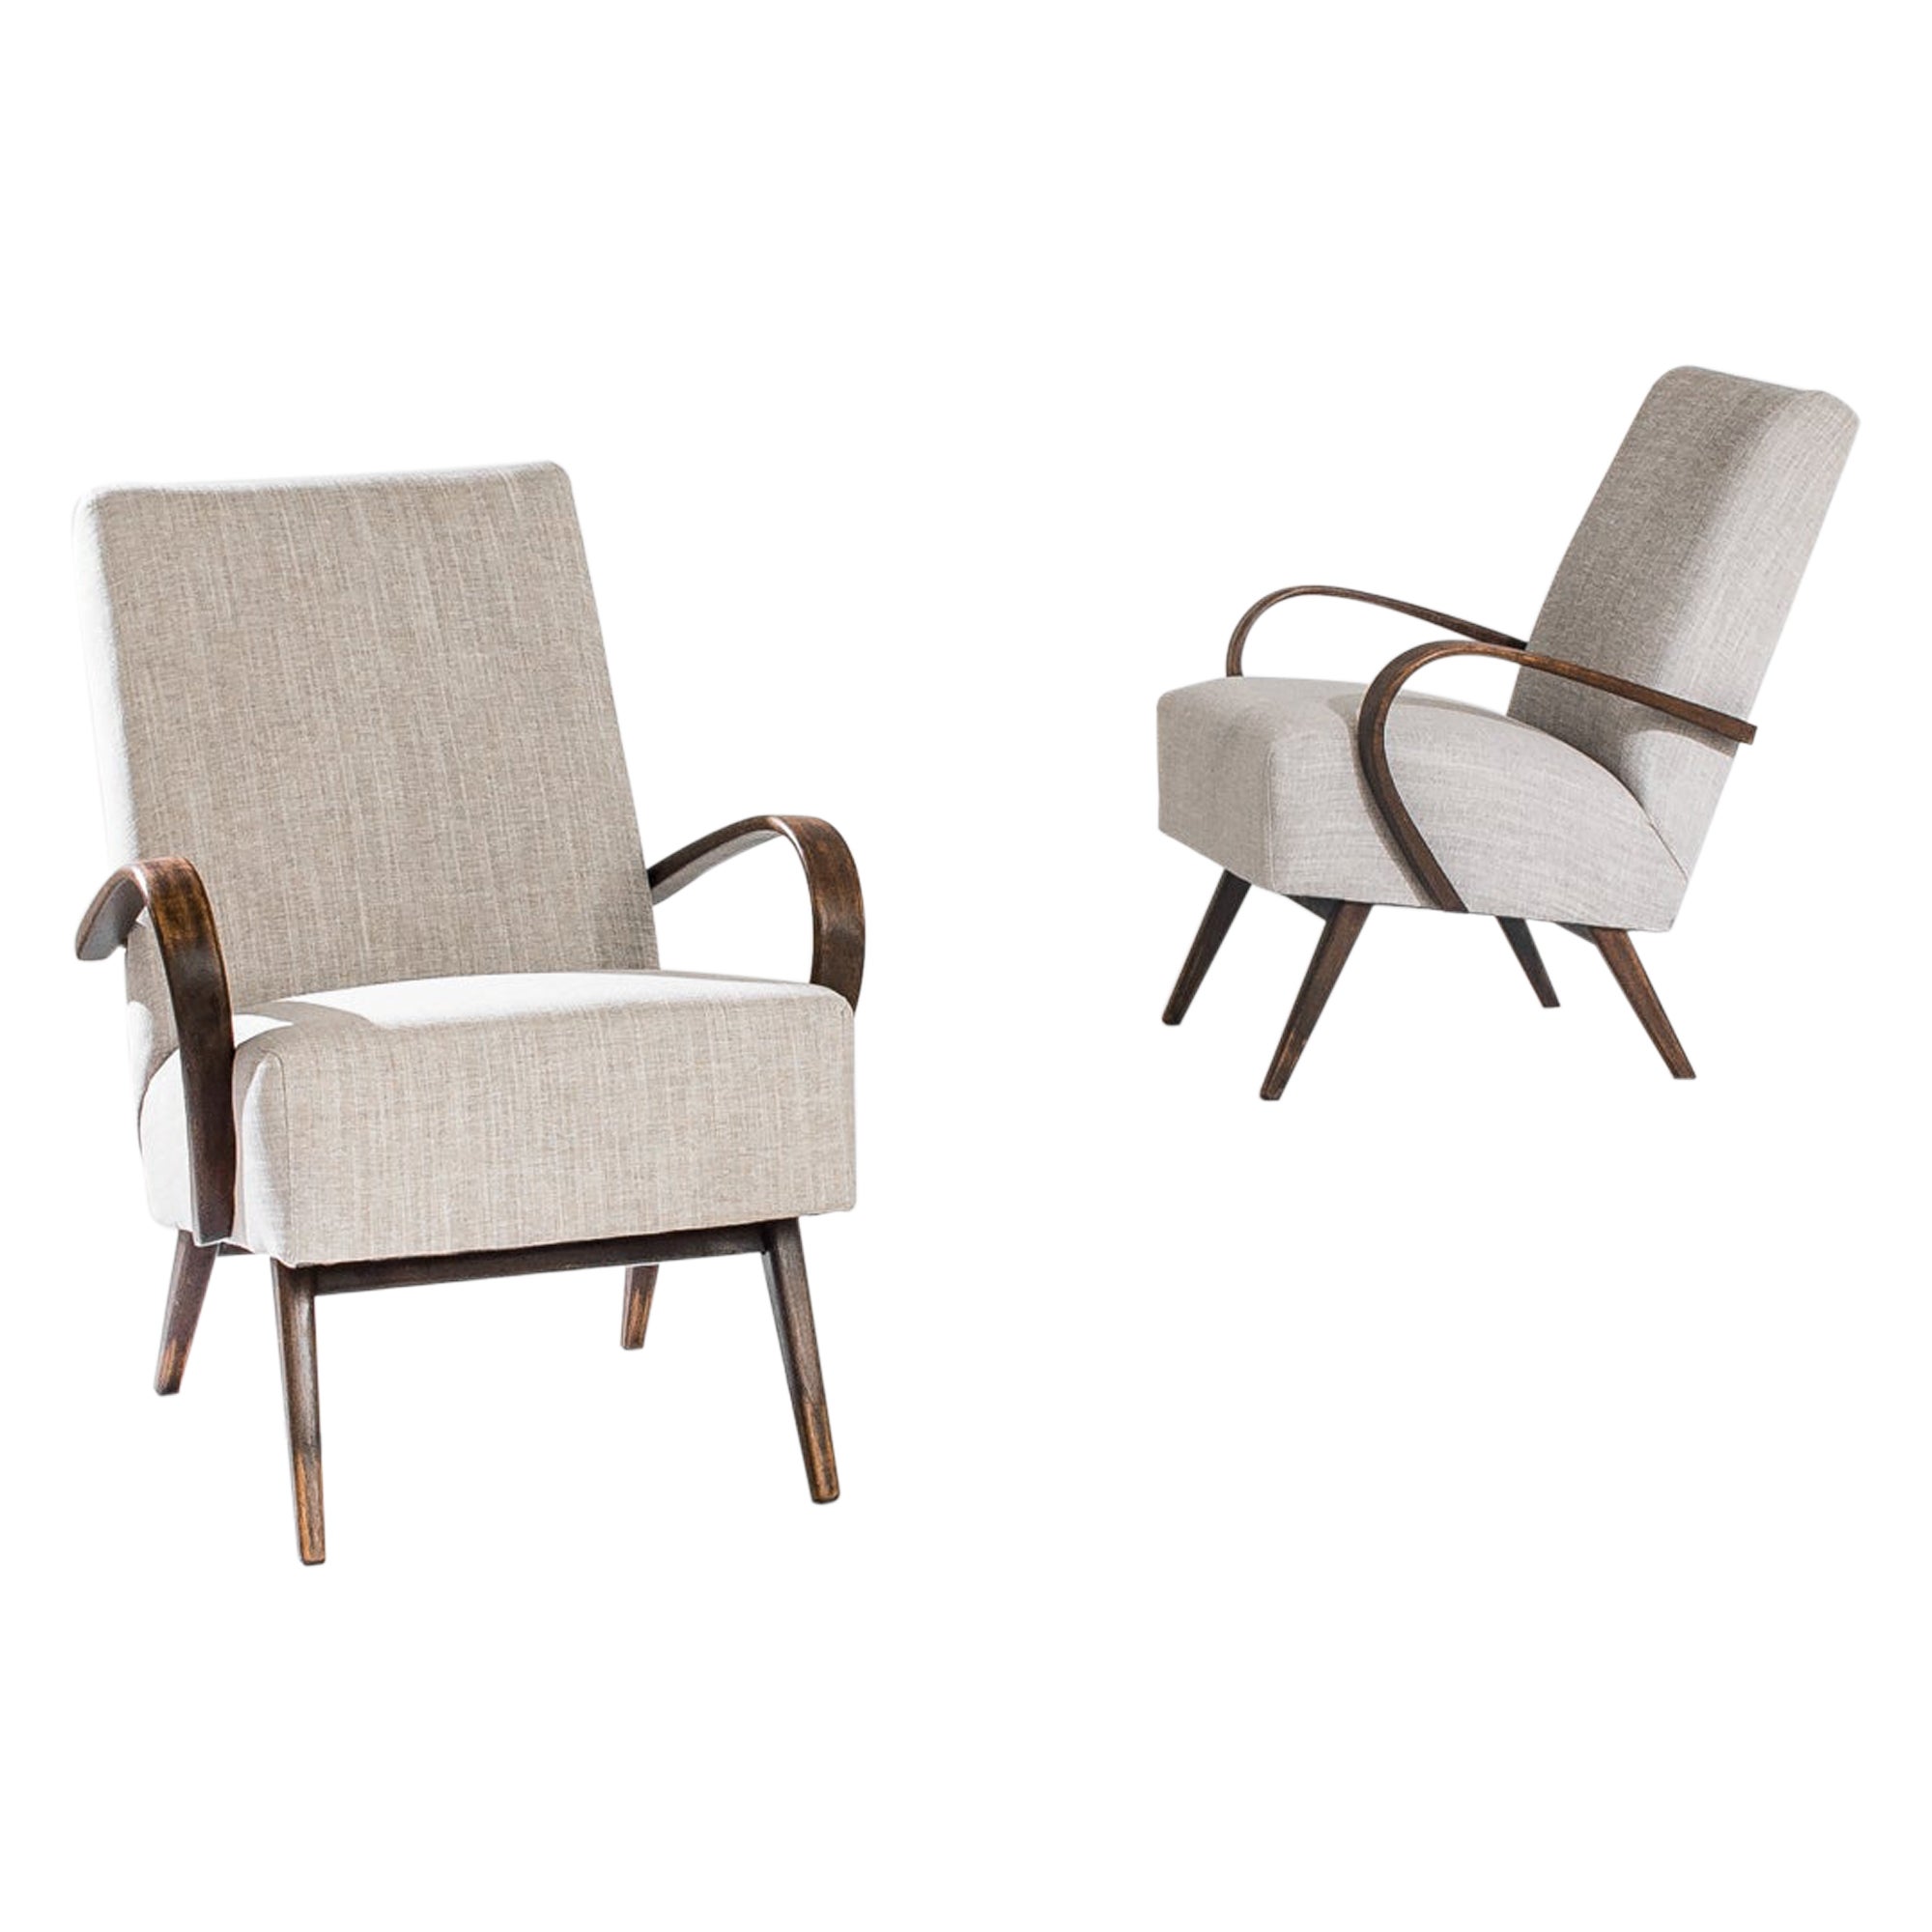 1950s Mid-Century Czech Beige Bentwood Armchairs, a Pair For Sale